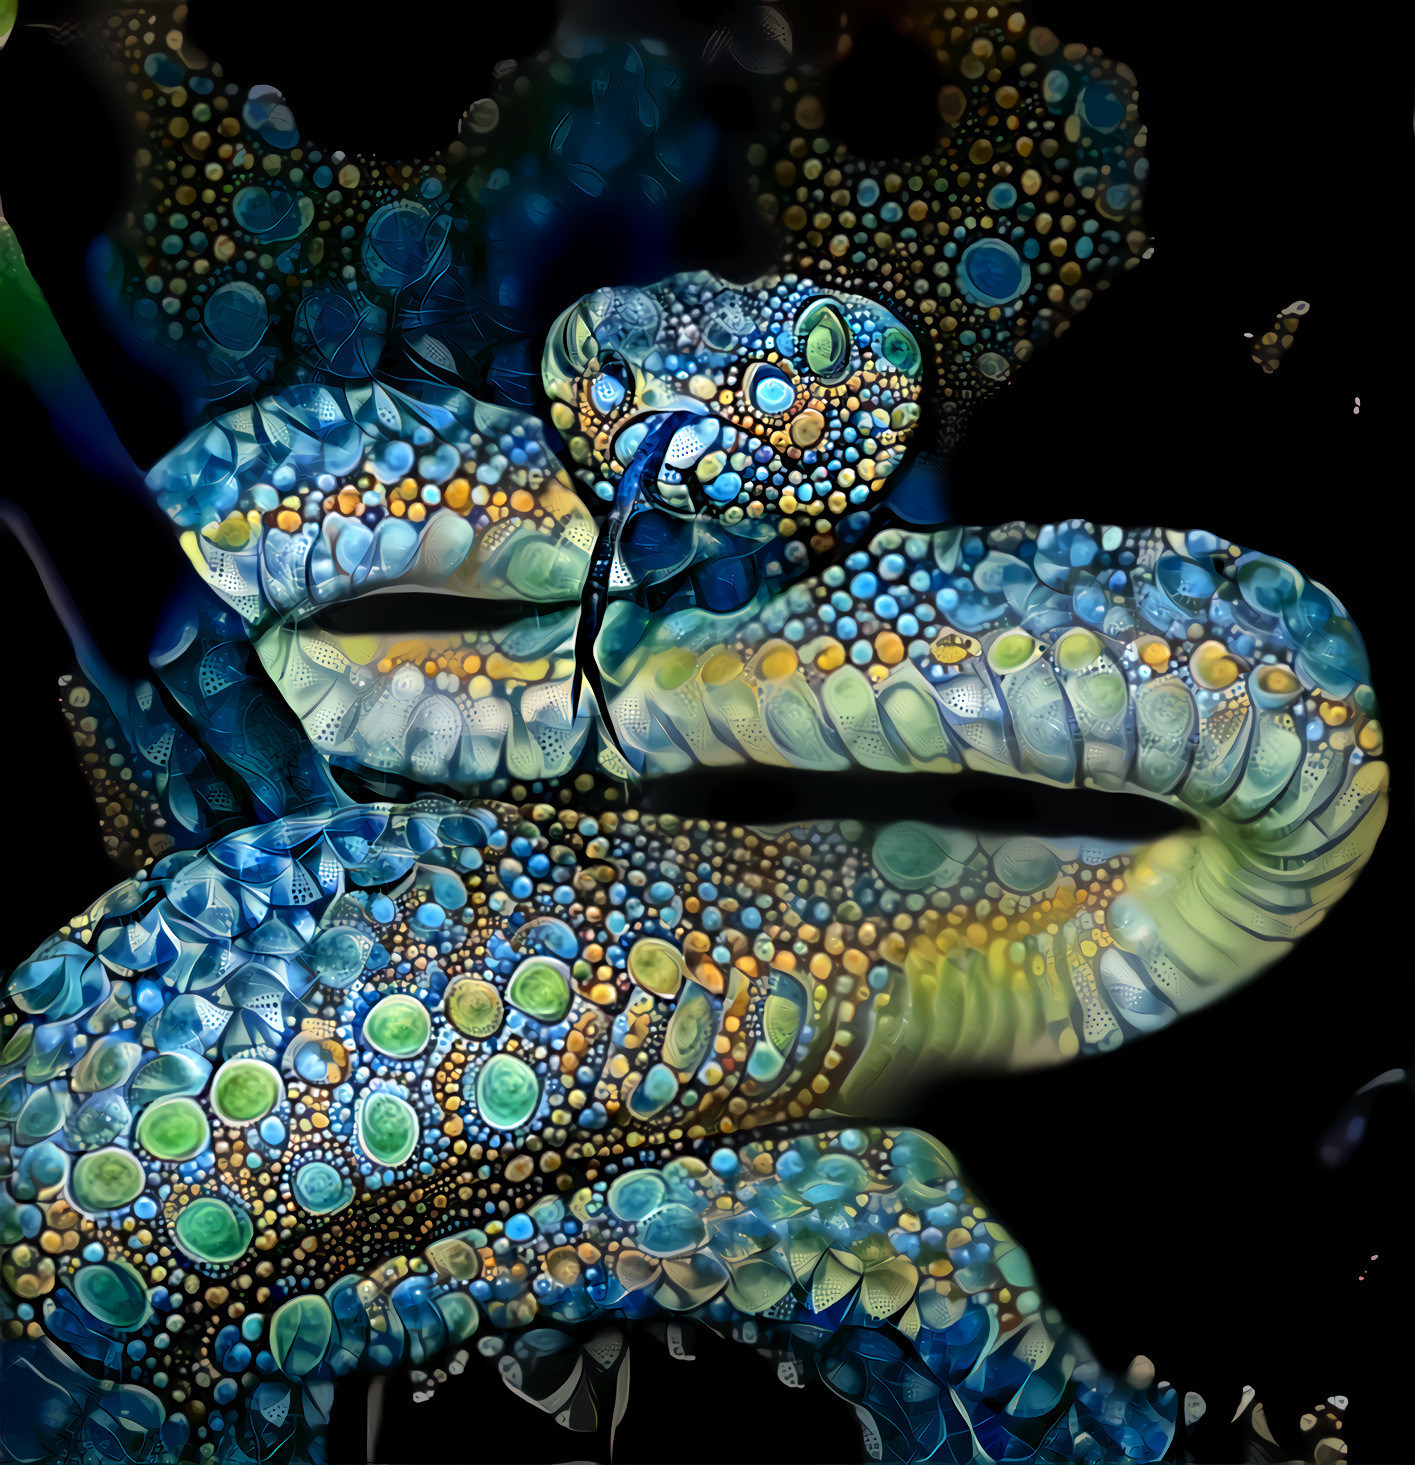 Bedazzled Snake [FHD]